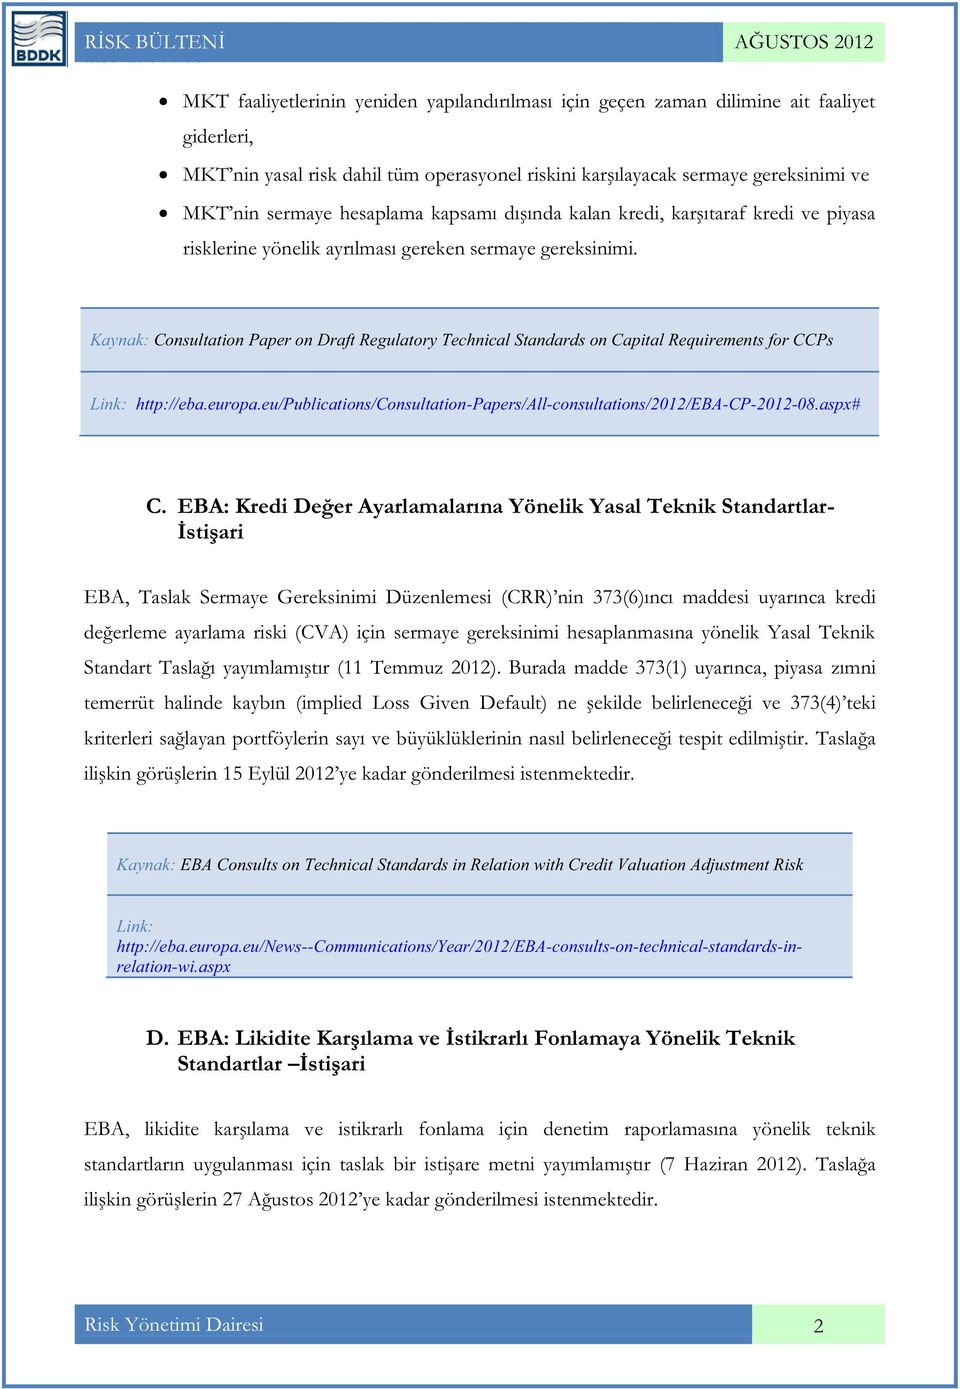 Kaynak: Consultation Paper on Draft Regulatory Technical Standards on Capital Requirements for CCPs Link: http://eba.europa.eu/publications/consultation-papers/all-consultations/2012/eba-cp-2012-08.